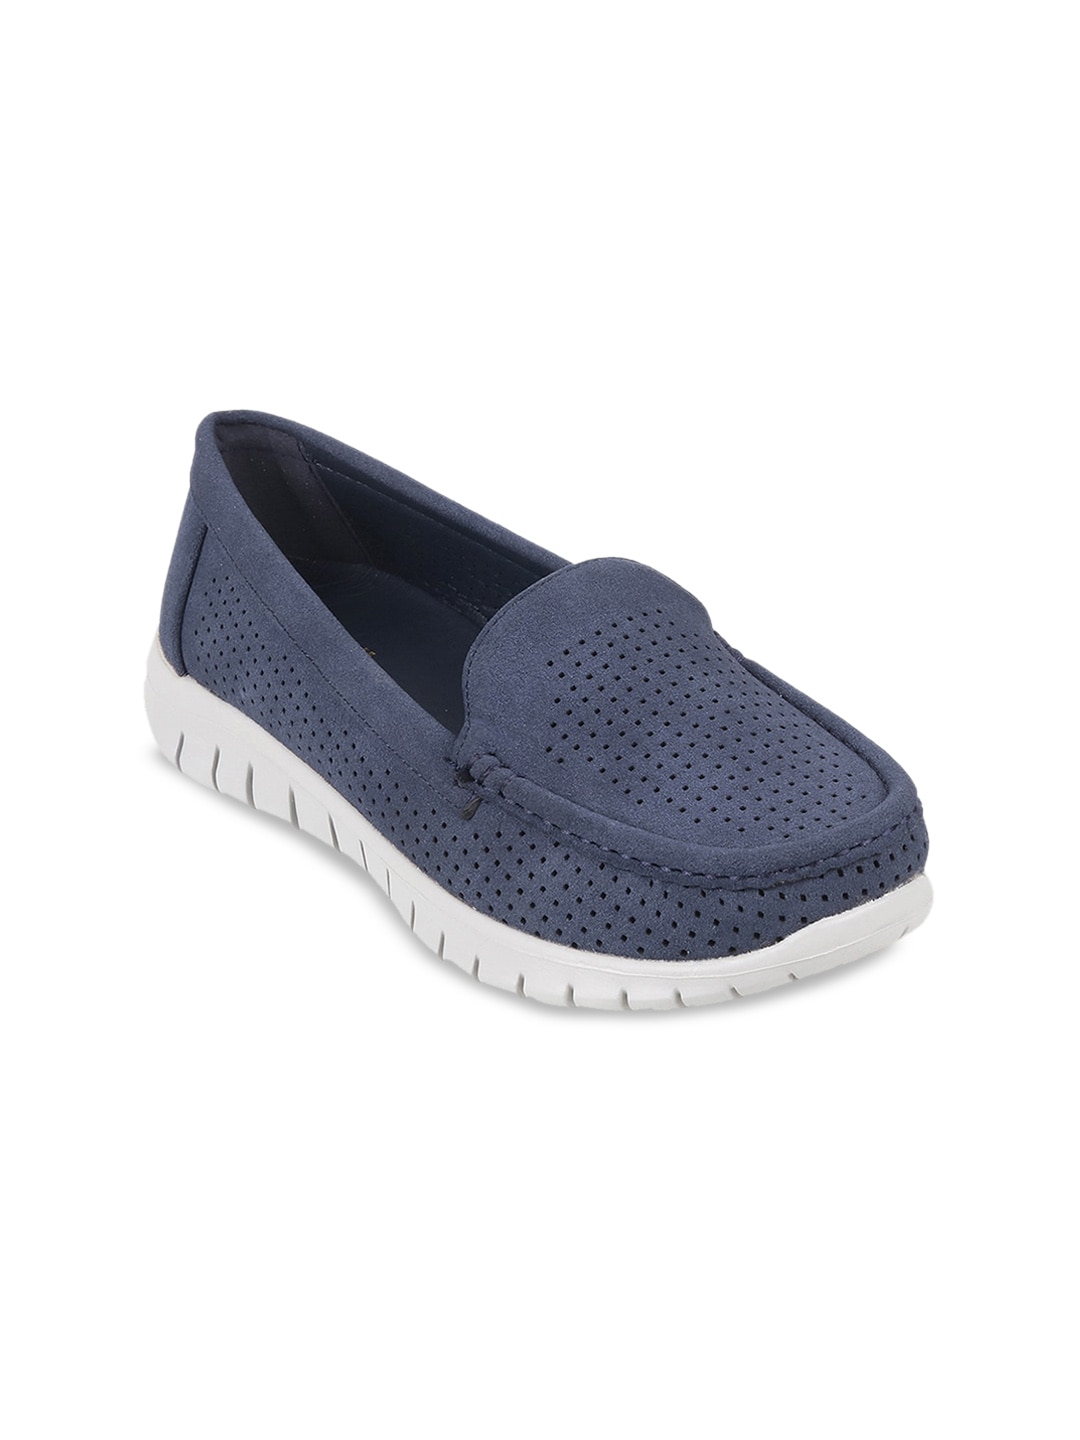 Mochi Women Woven Design Loafers Price in India